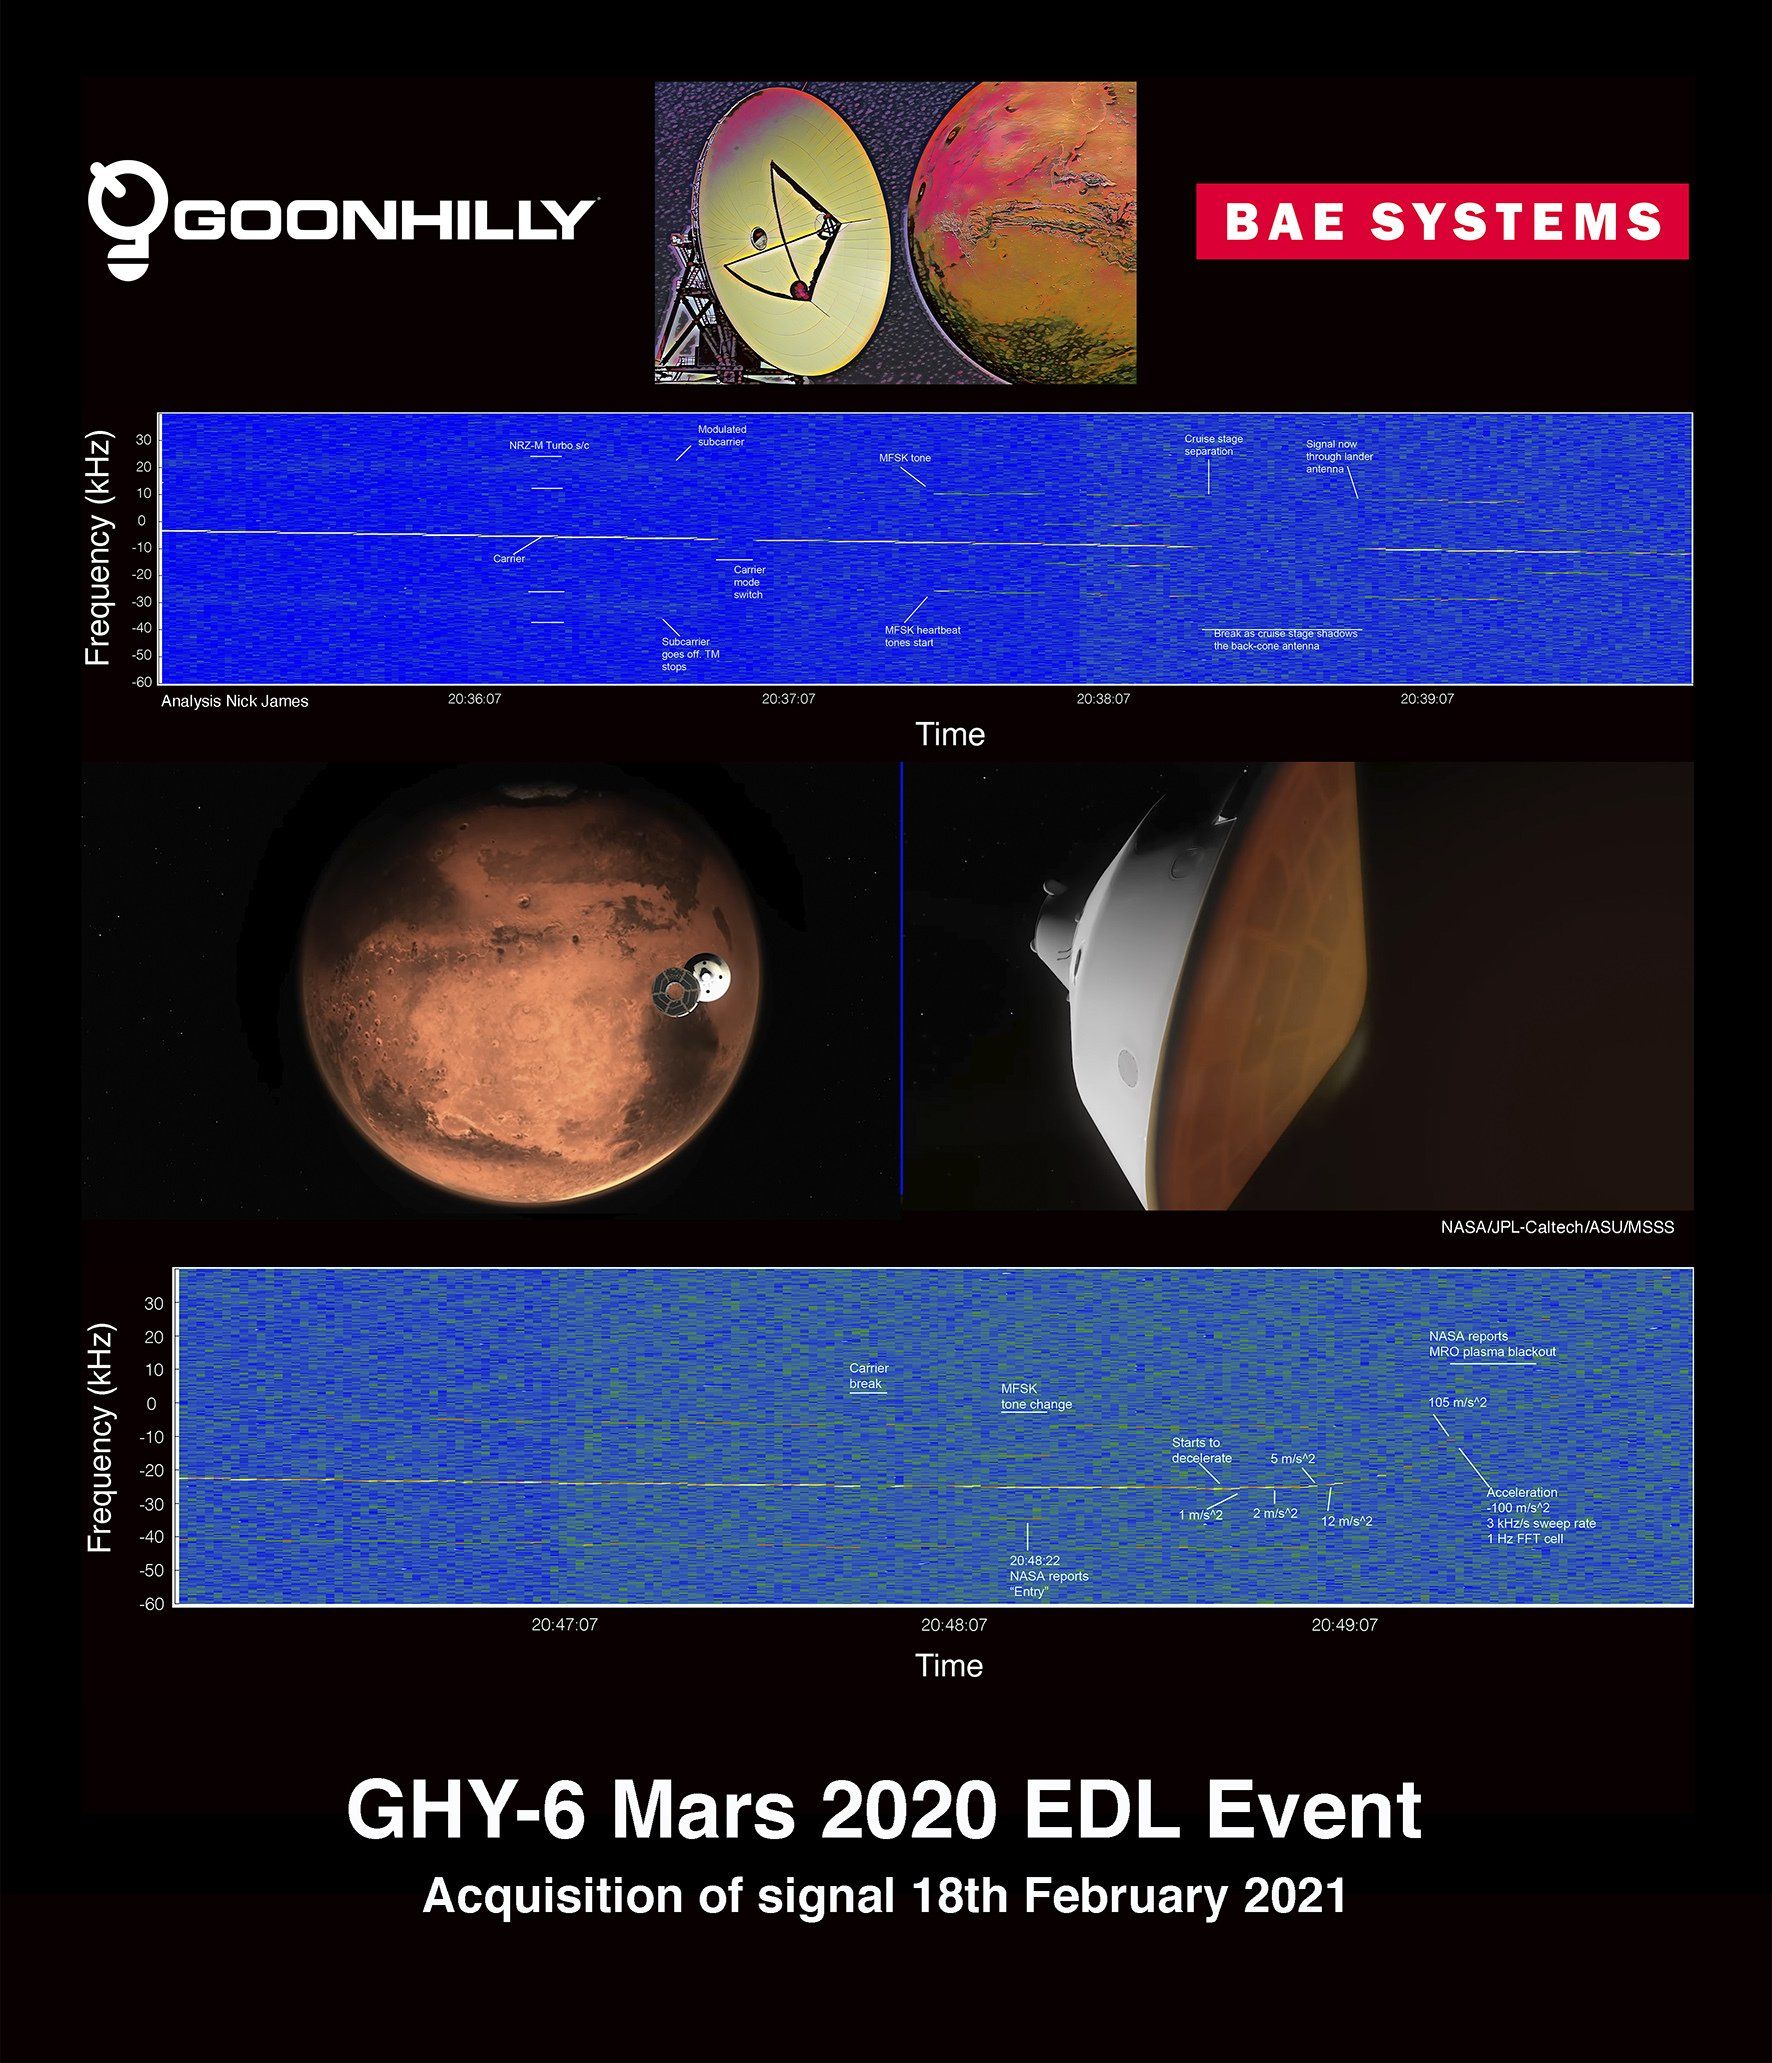 GES GHY6 Deep Space Antenna observes Mars 2020 Perseverance Signal